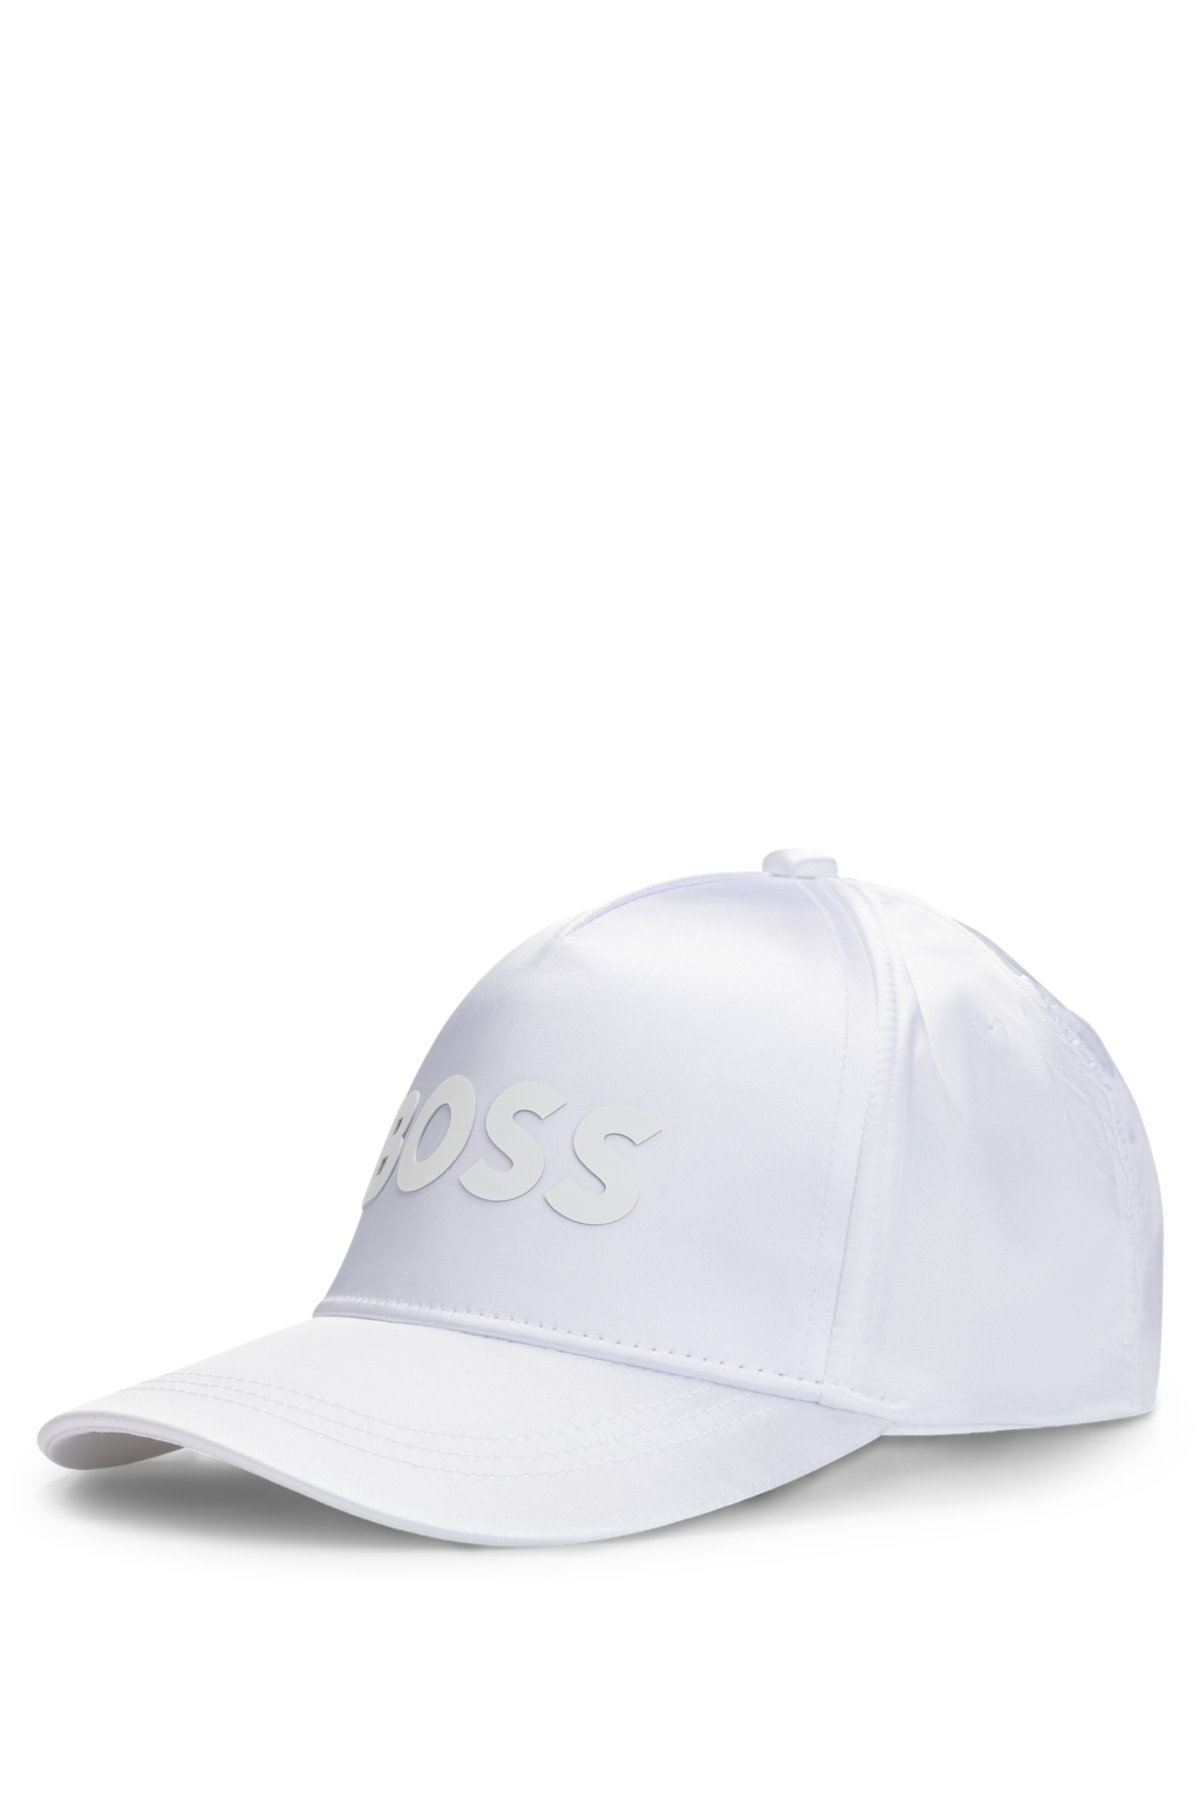 Kids' cap in satin with rubber-print logo, White